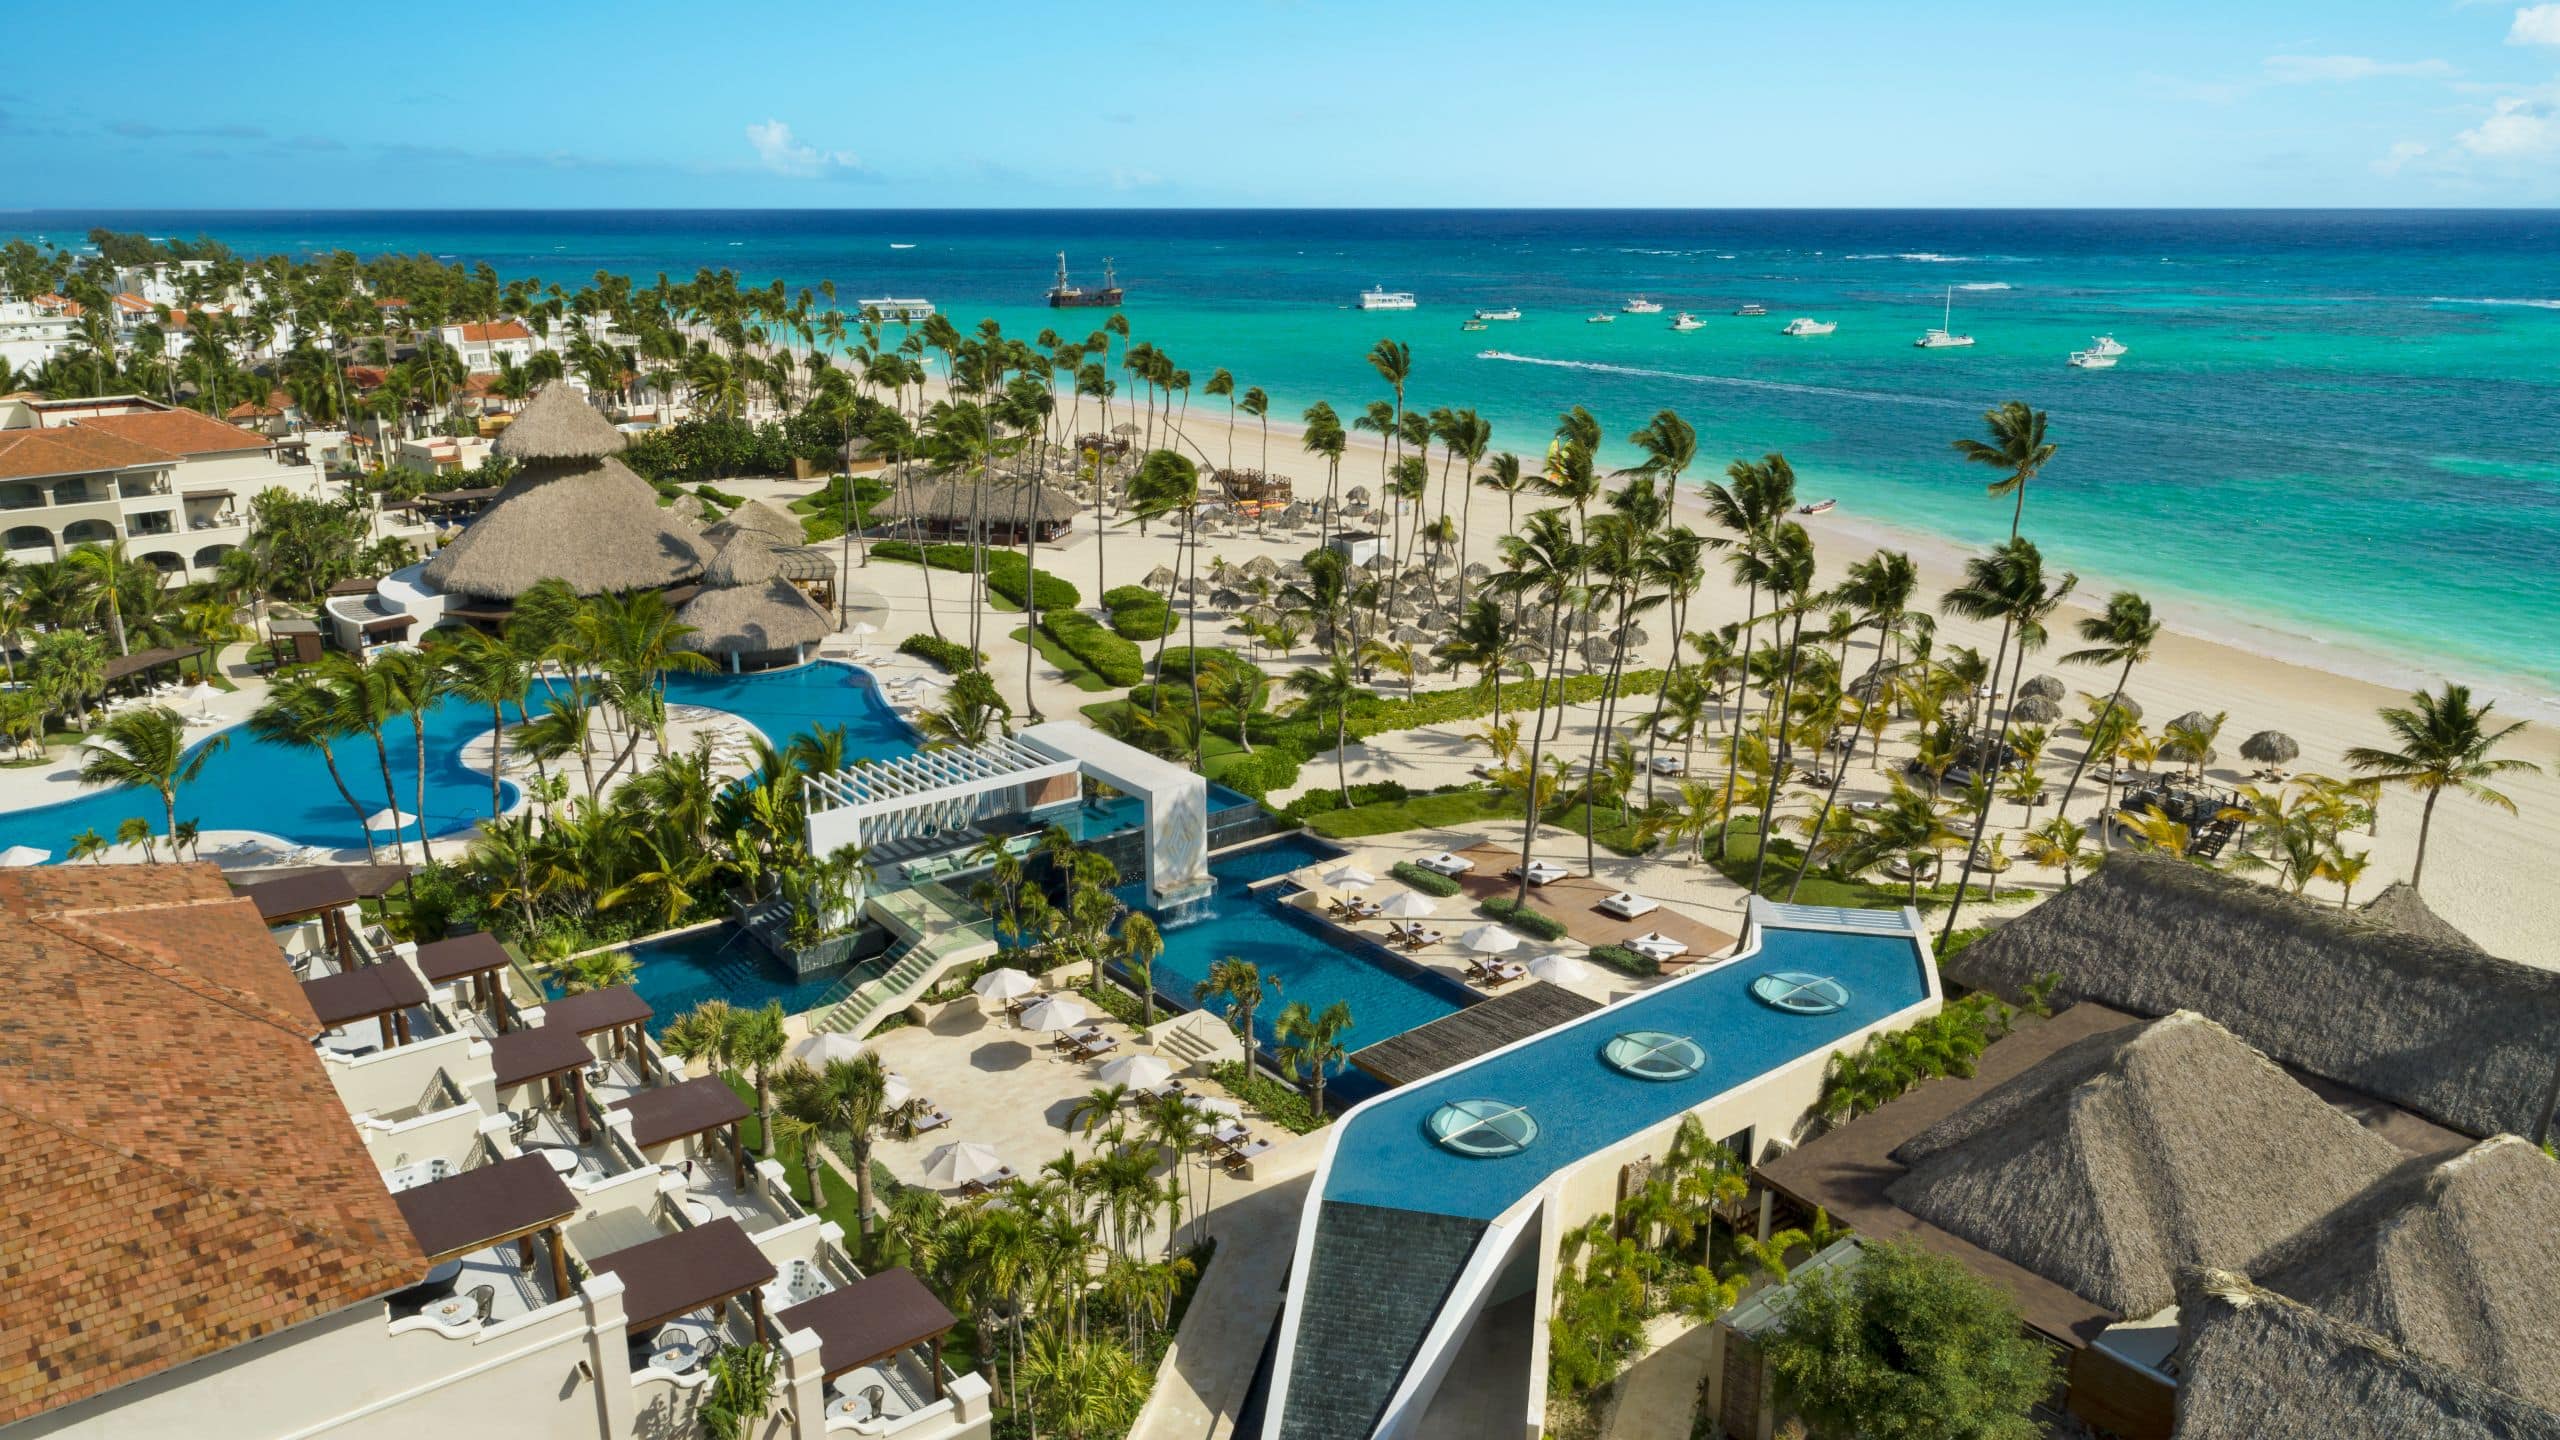 Luxury all-adult resort in the Dominican Republic Secrets Royal Beach Punta Cana Part of World of Hyatt pic